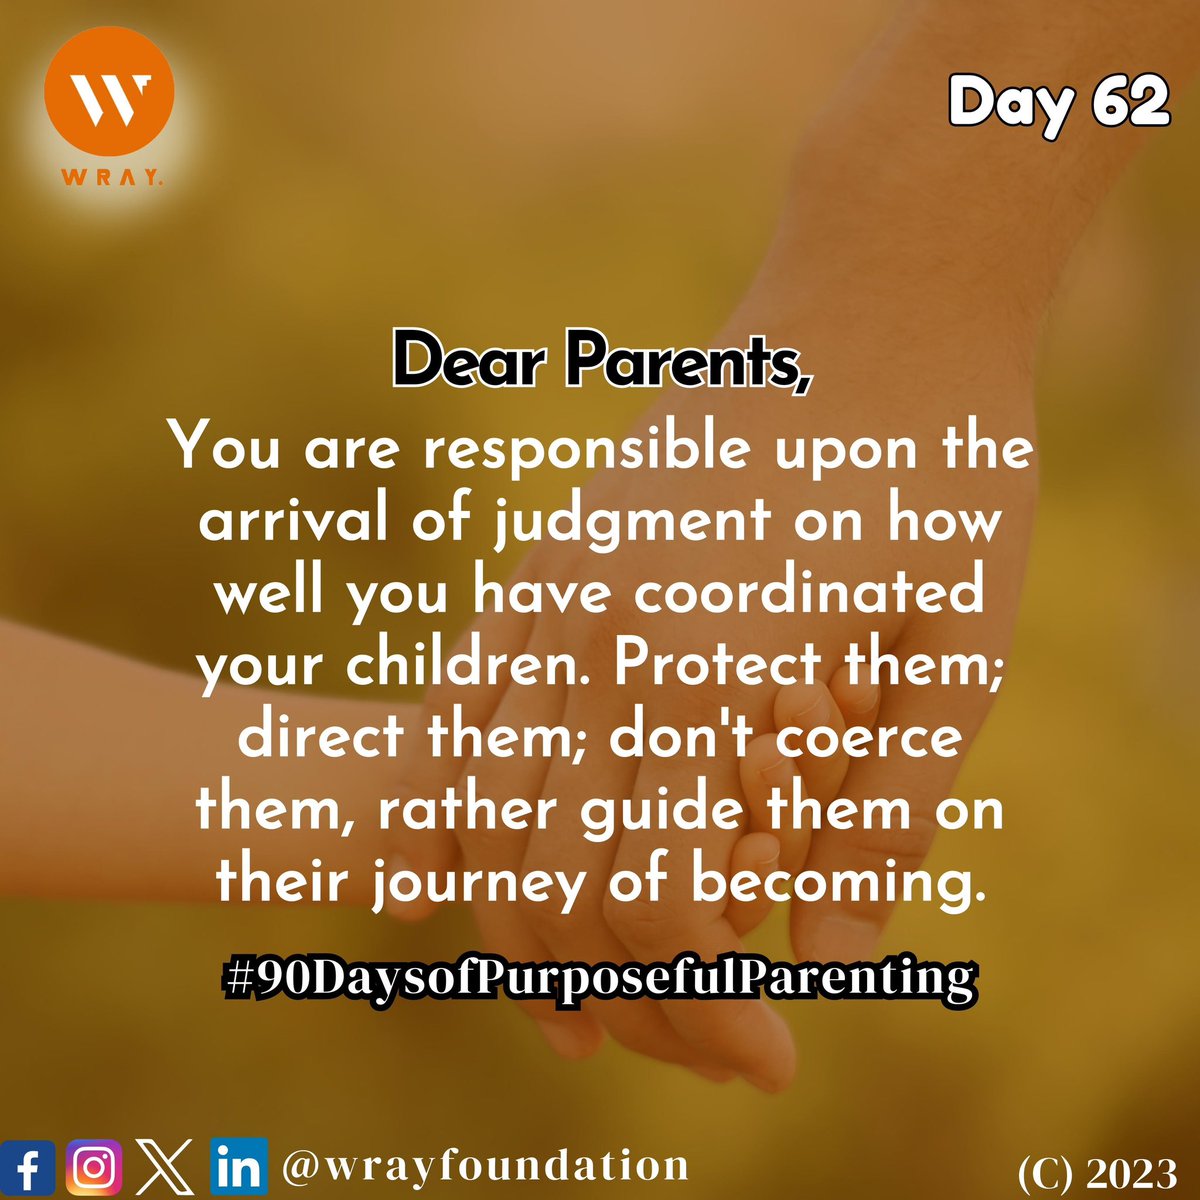 Day 62 of Parent Education Awareness 

#WRAYFoundation #ParentEducationCampaign #Day62 #EducatingParents #MakingADifference #90DaysOfPurposefulParenting #ValueYourChildren #ParentalSupport #DiscoverYourPotentials #Teenagers #Youths #Counselling #Mentorship #Purpose #NGO